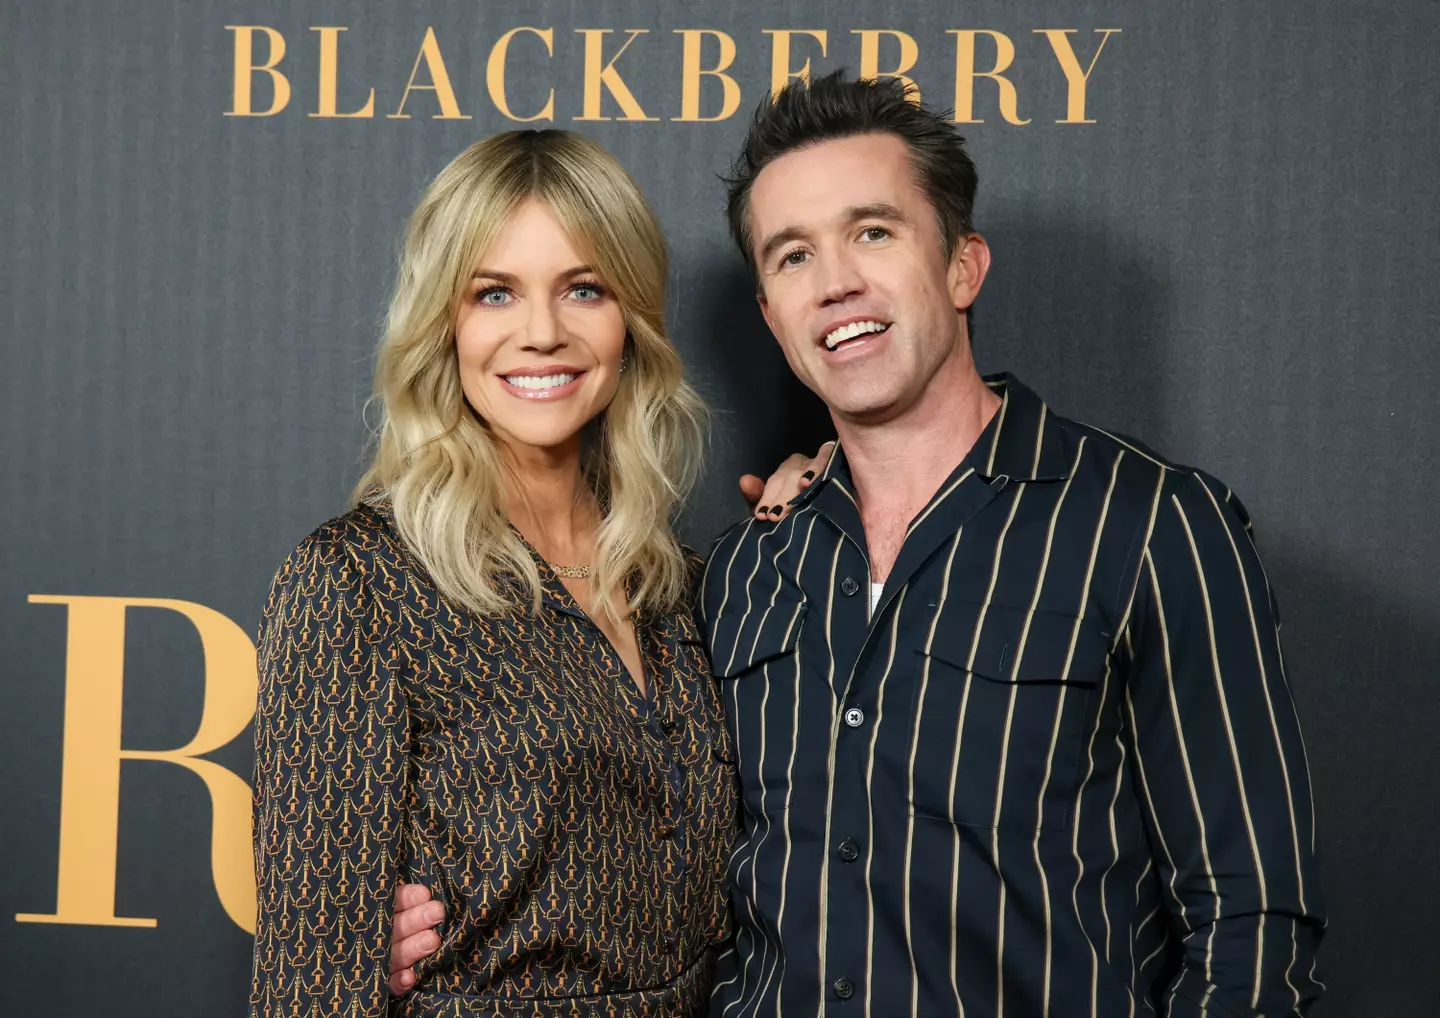 Kaitlin Olson and Rob McElhenney have two children together.